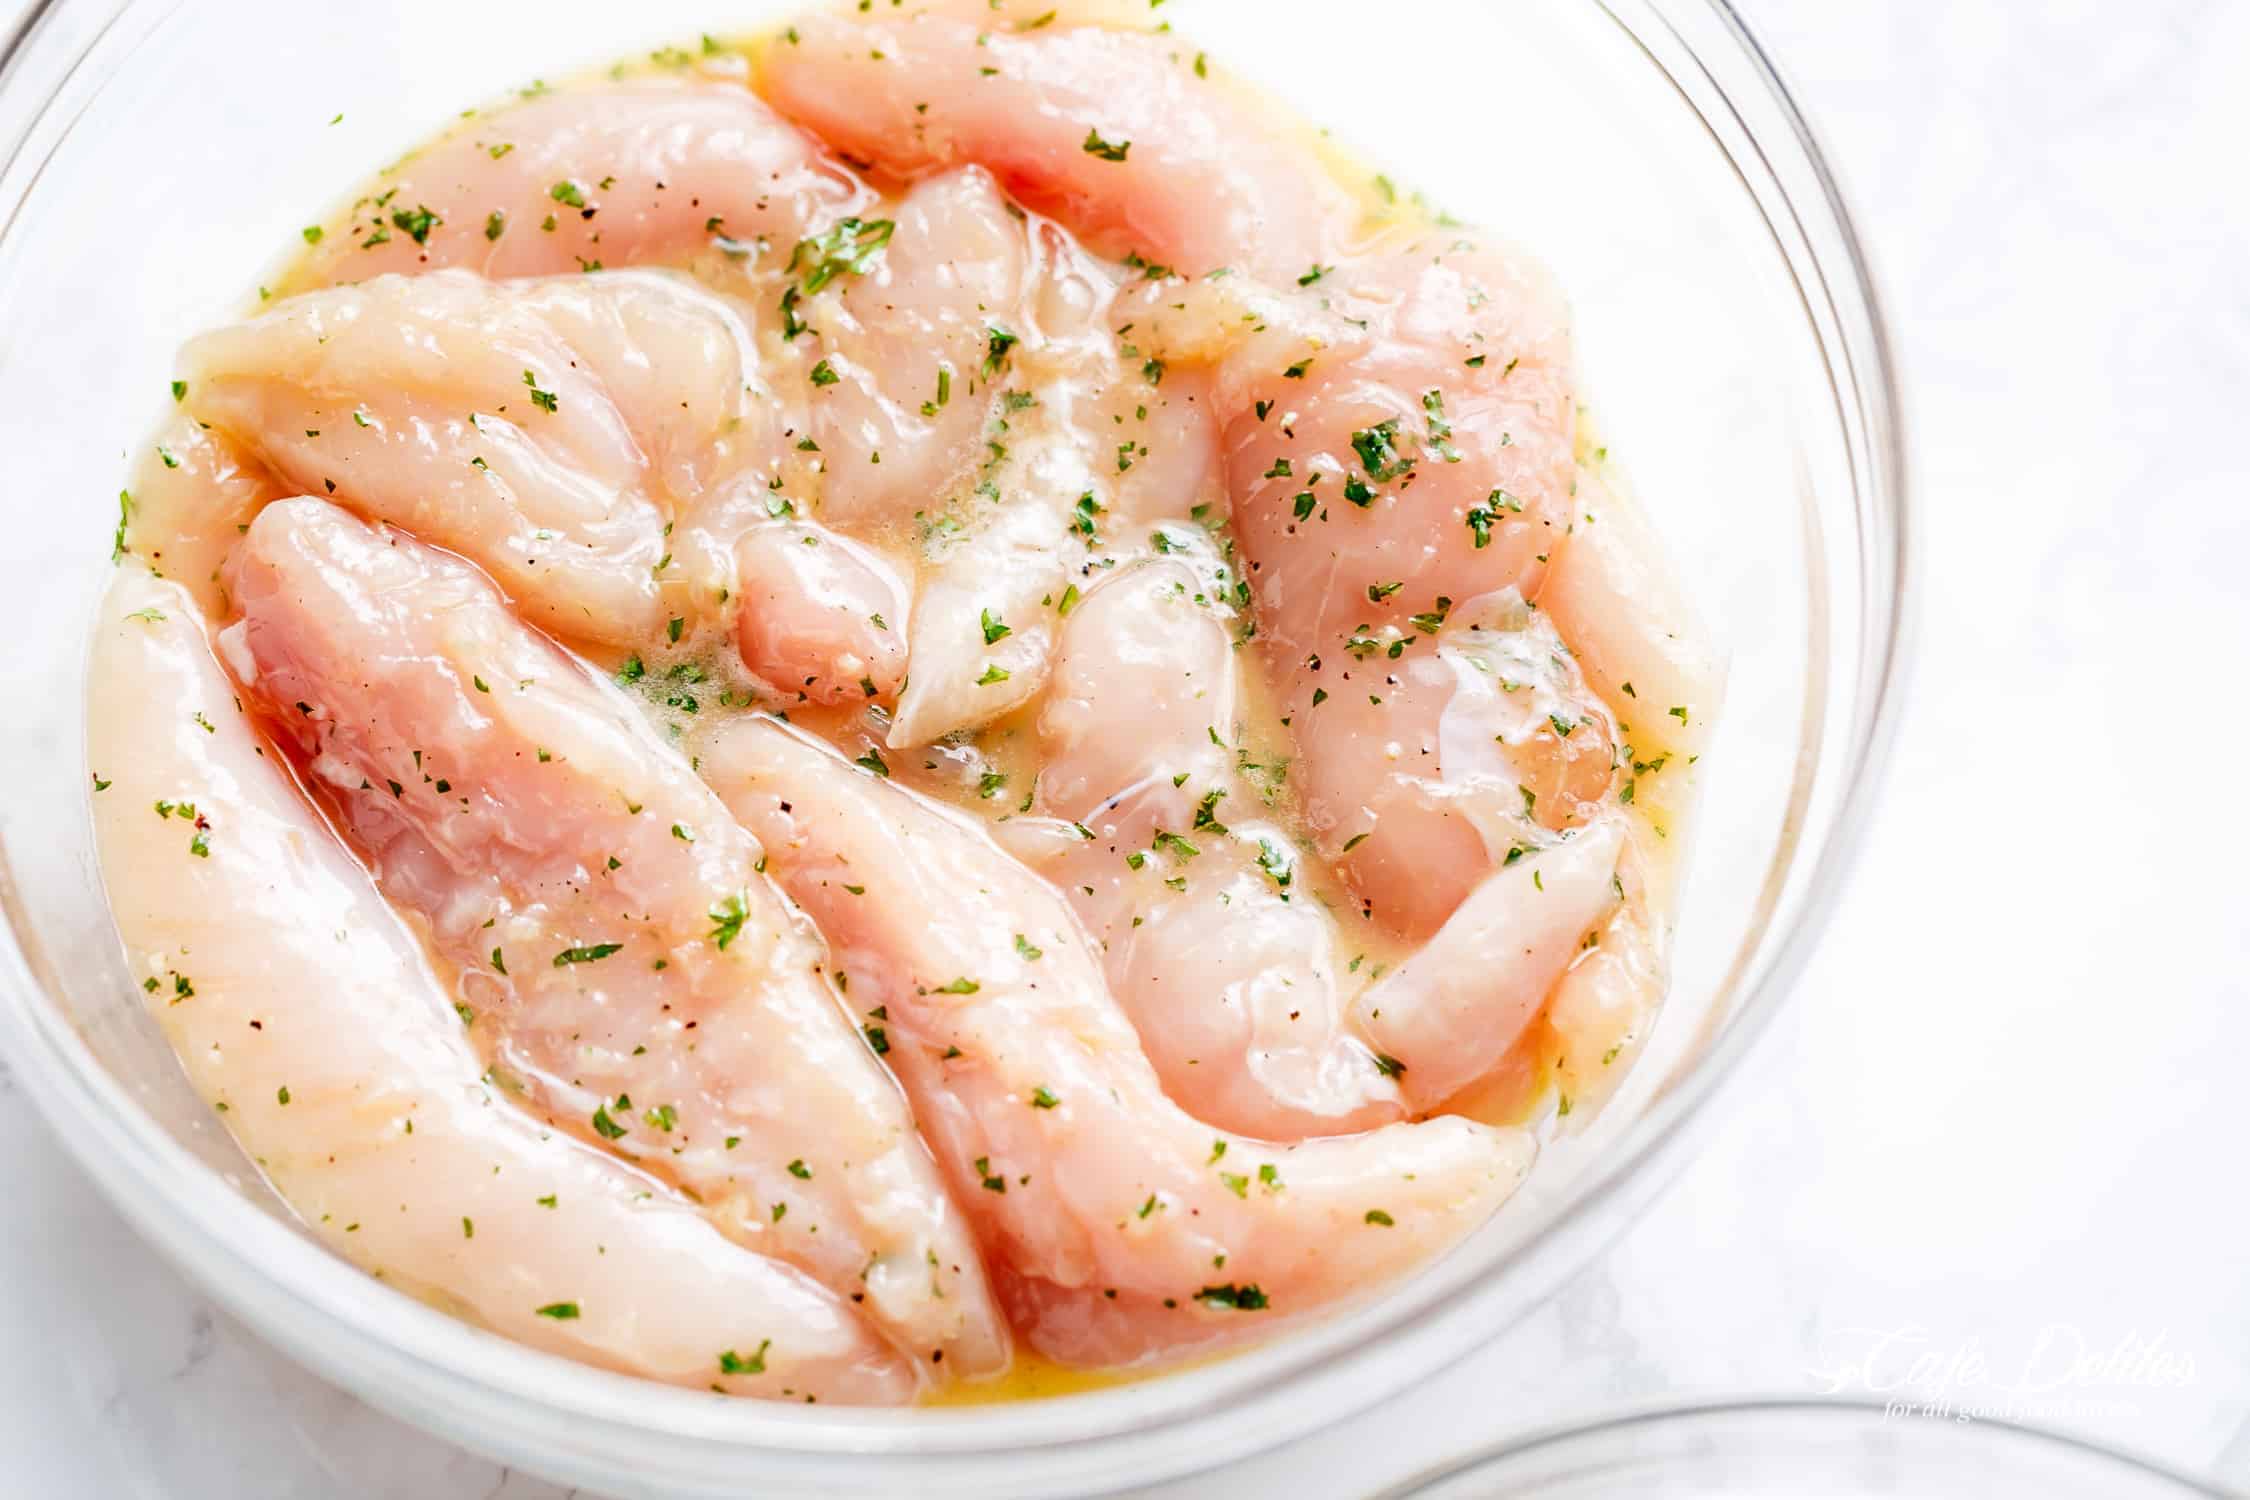 How To Make Chicken Tenders Marinade | cafedelites.com